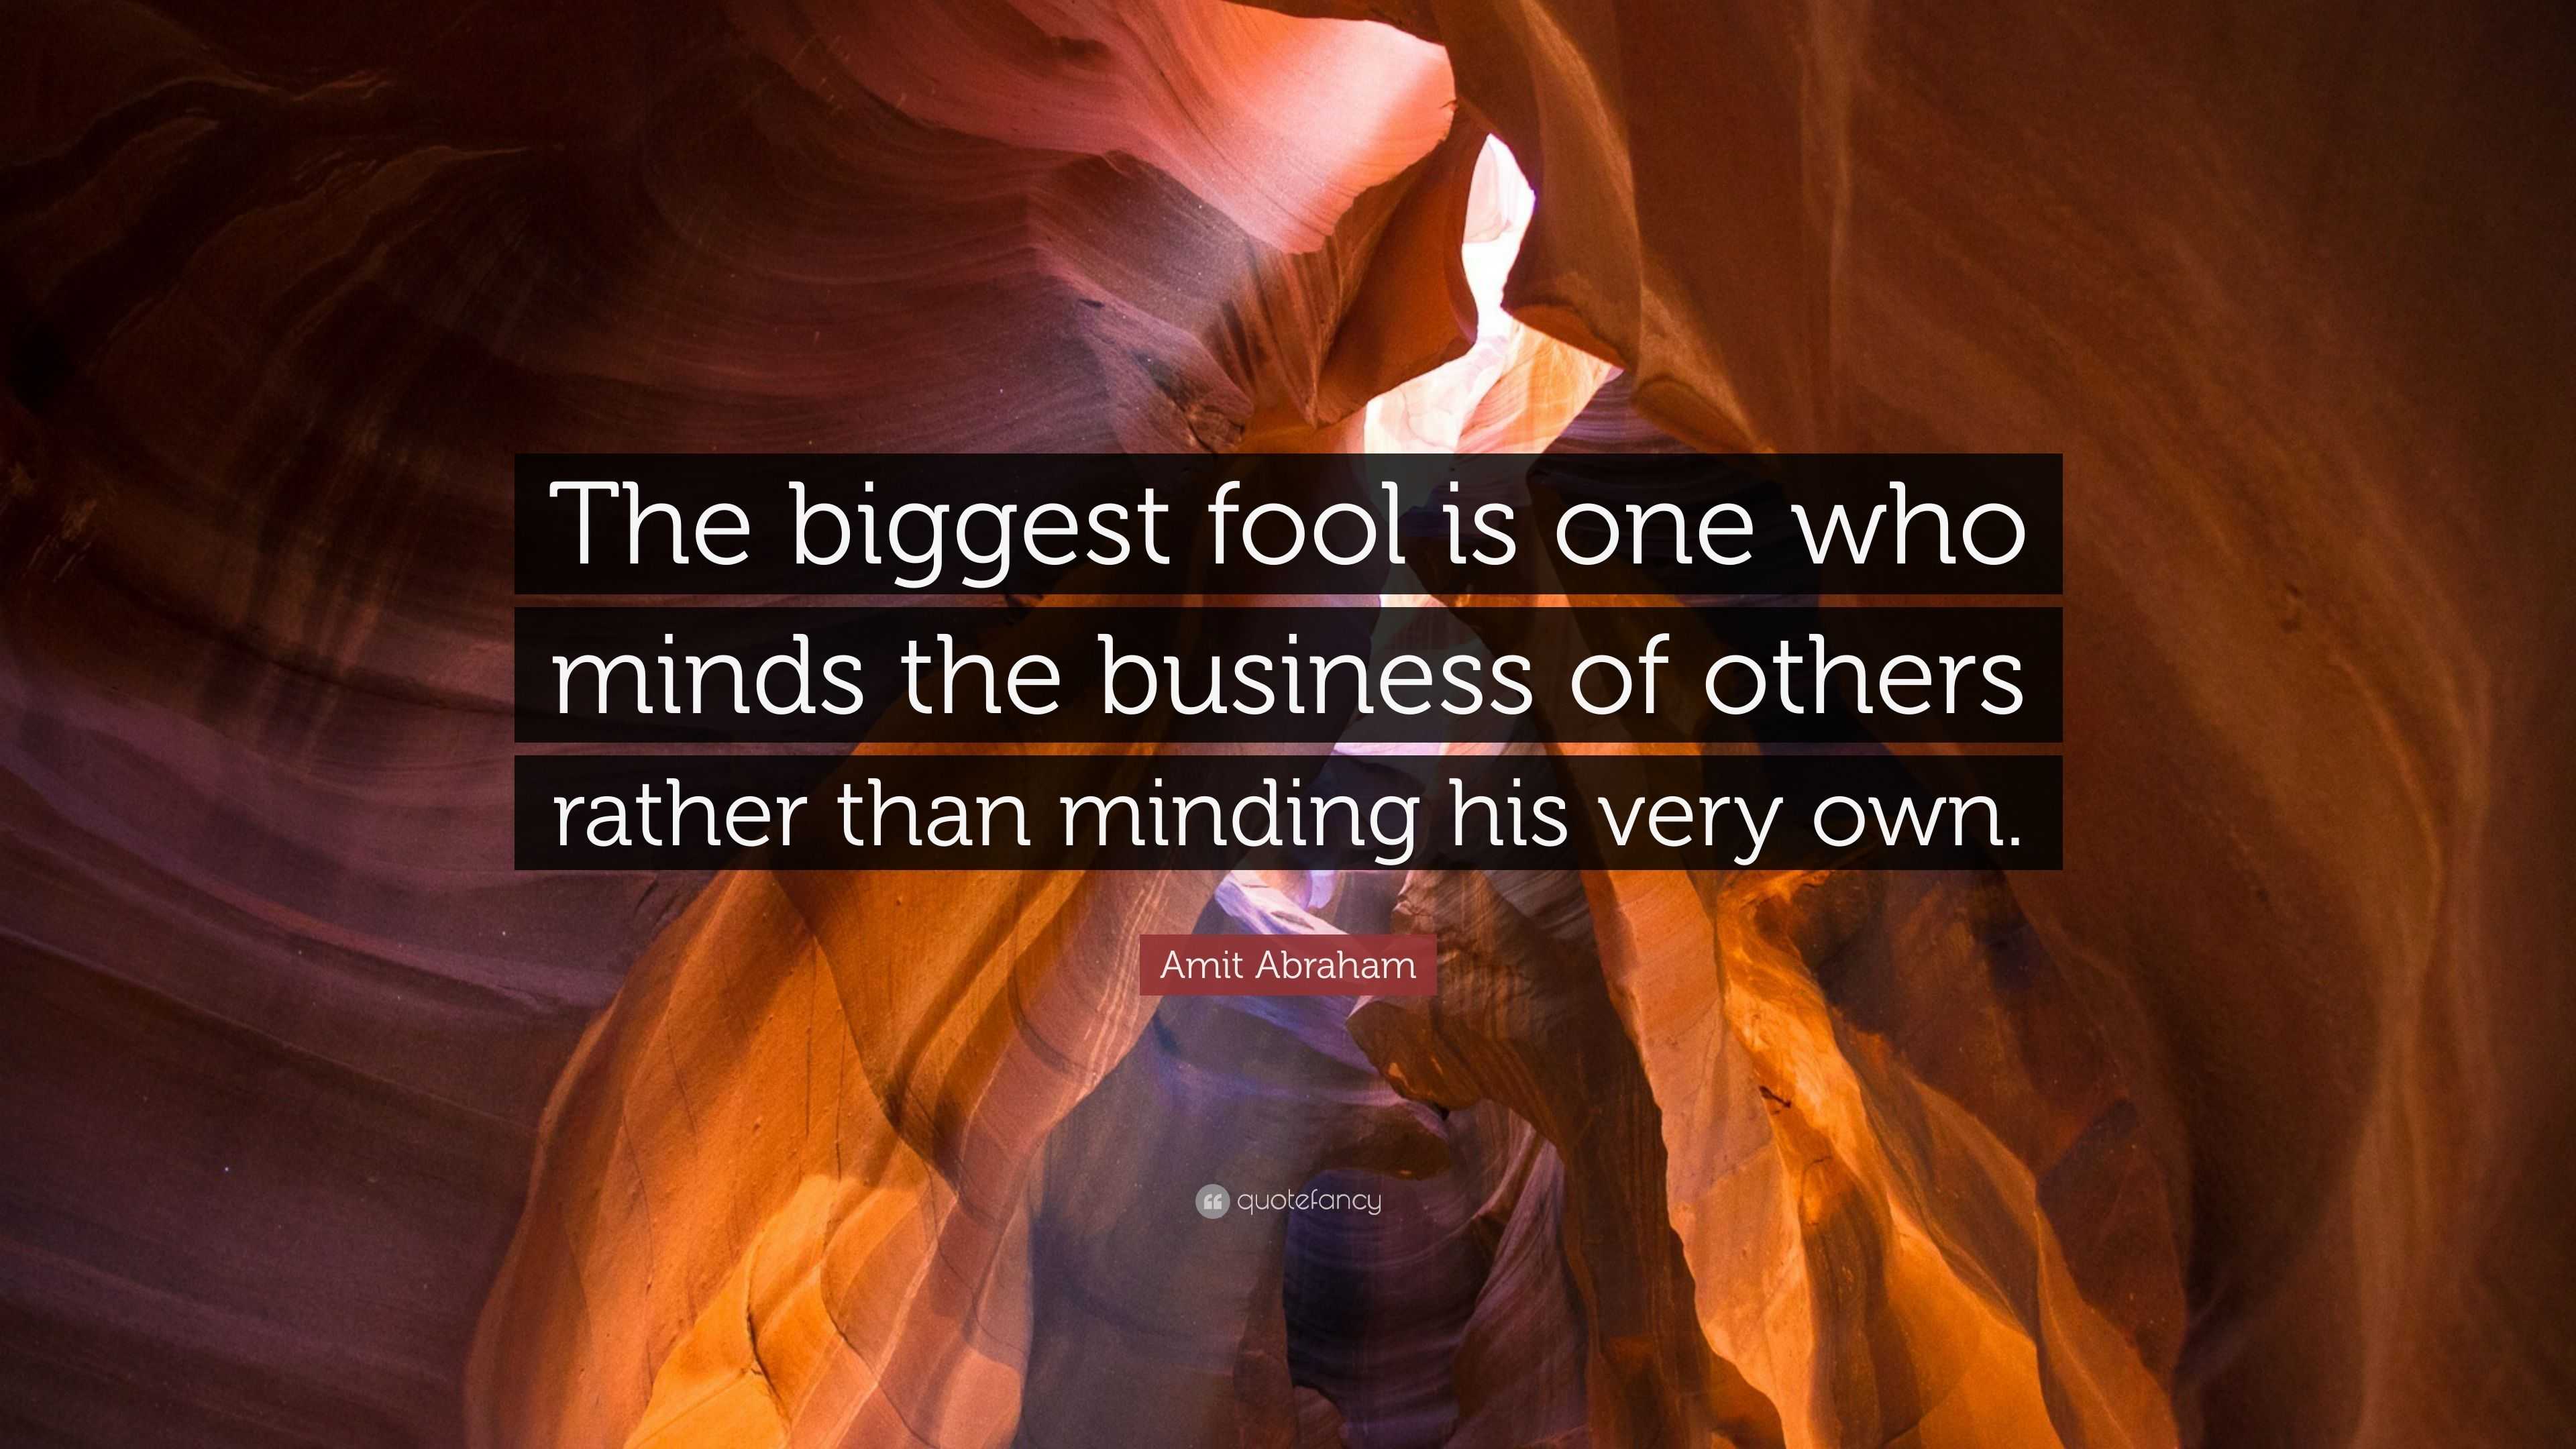 Amit Abraham Quote: “The biggest fool is one who minds the business of ...